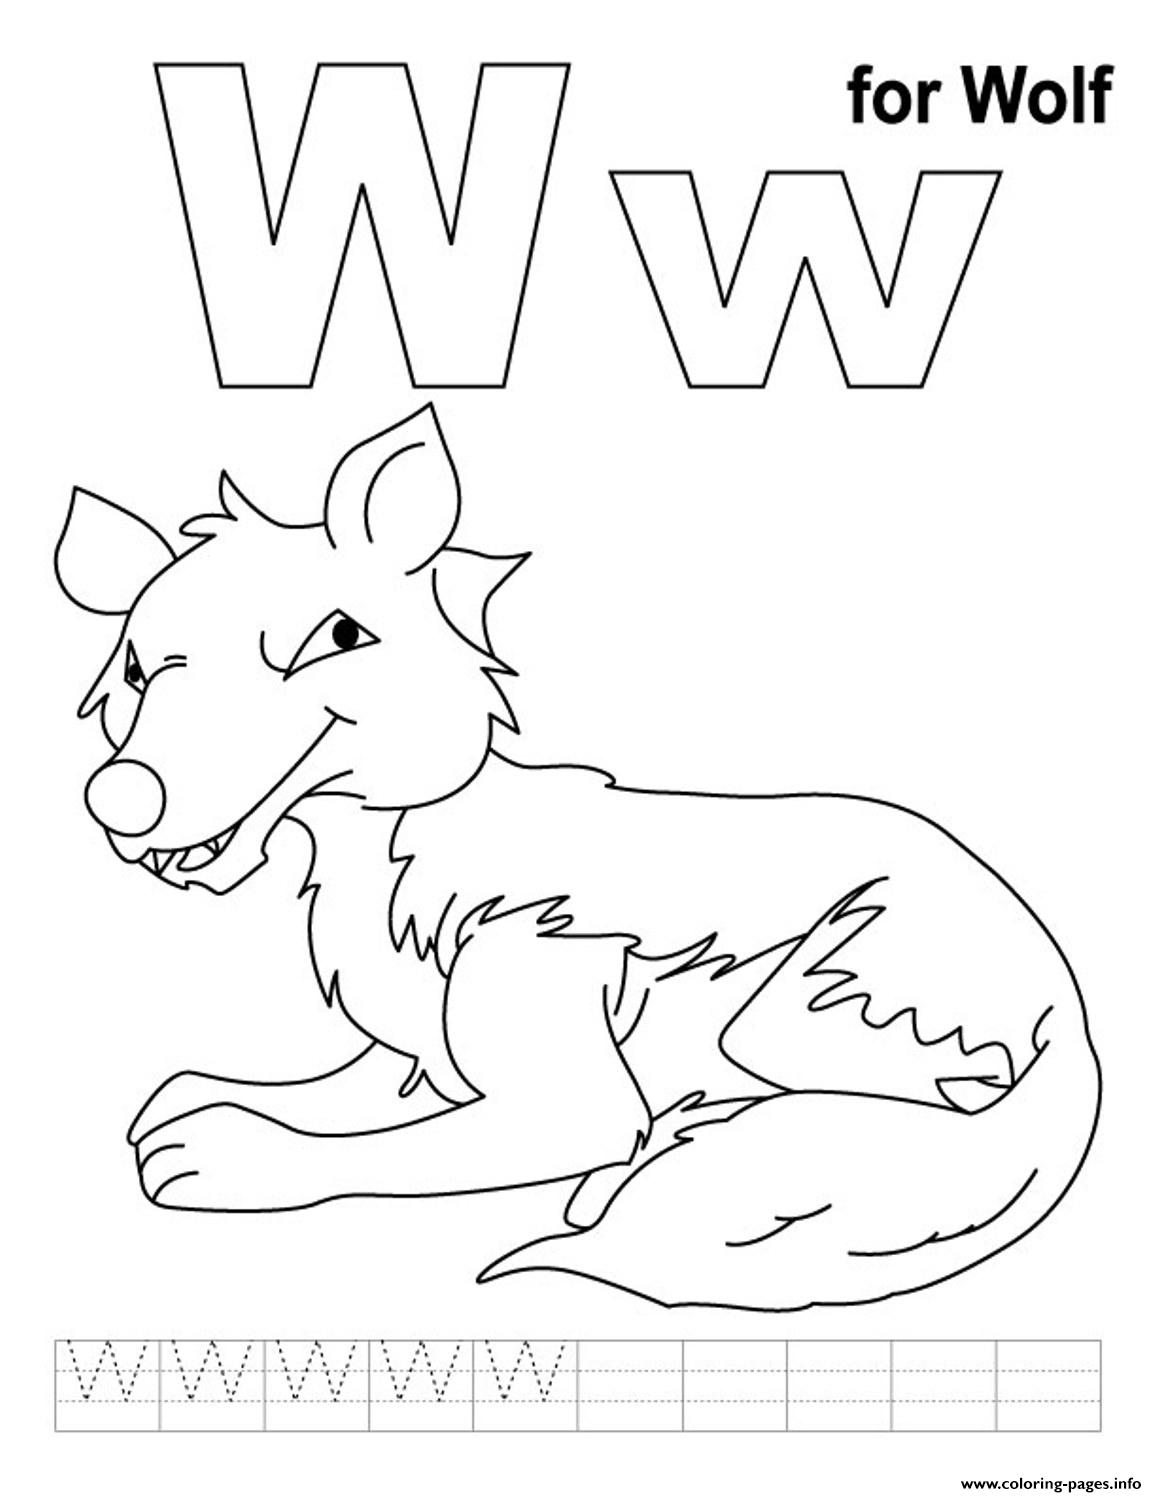 Wolf Free Alphabet coloring